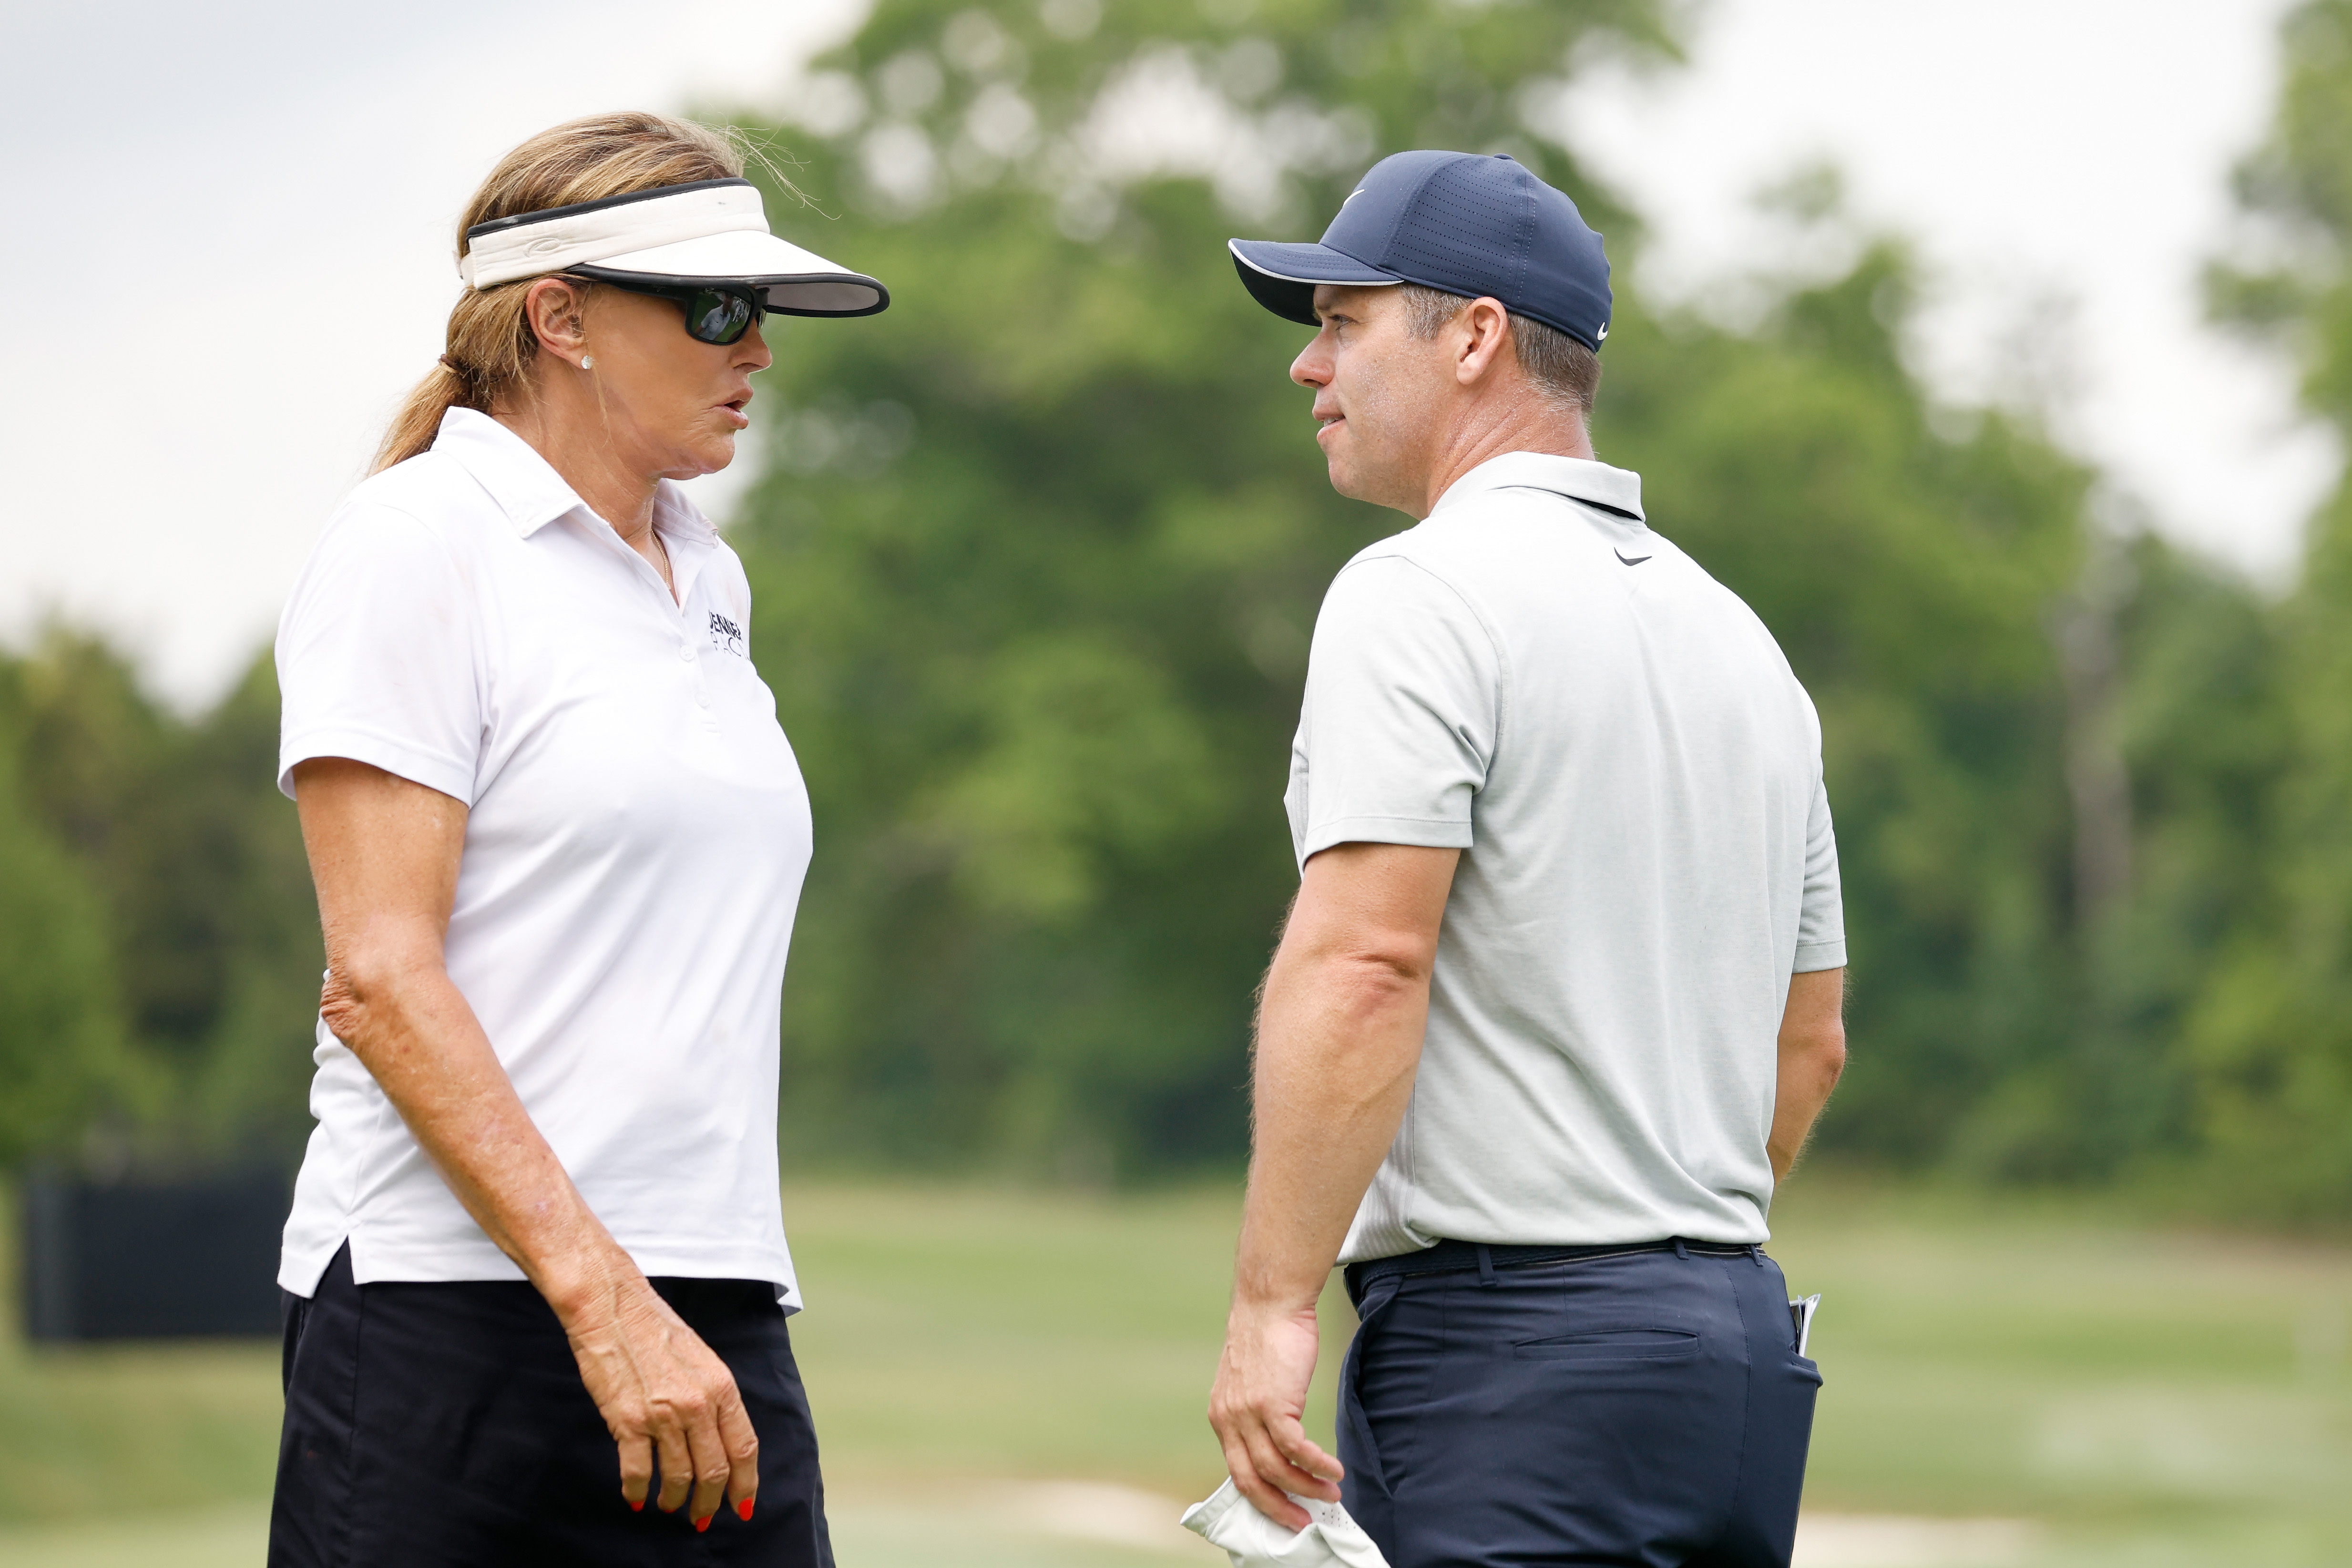 Caitlyn Jenner talks to Paul Casey during the pro-am prior to the LIV Golf Invitational - Bedminster on July 28, 2022 in Bedminster, New Jersey | Source: Getty Images